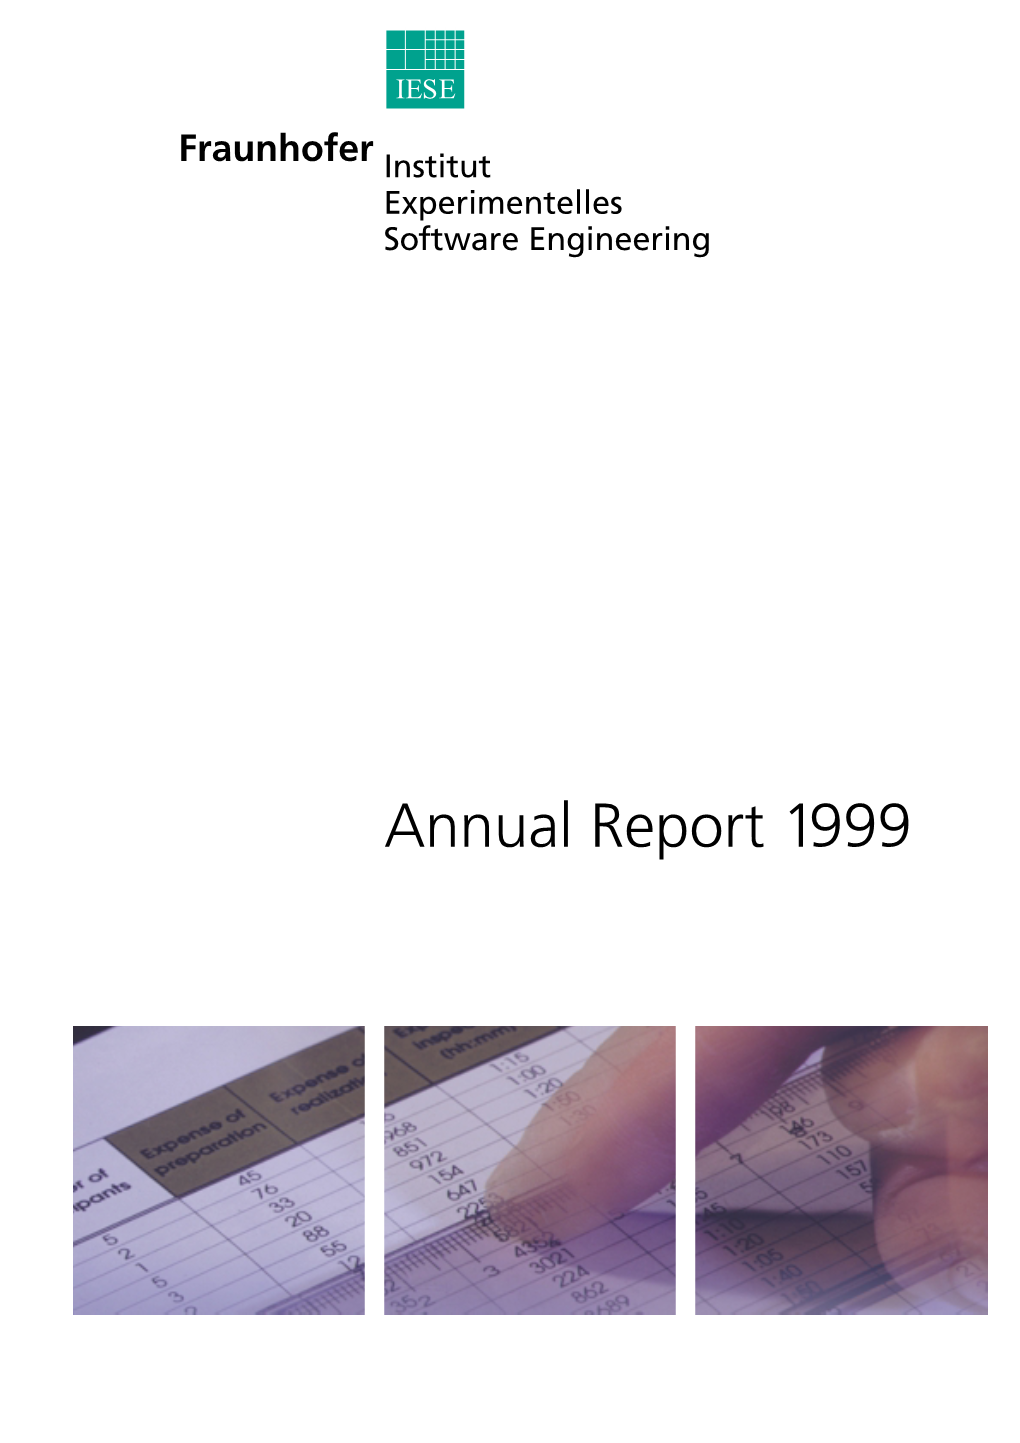 On 1999 in the Annual Report